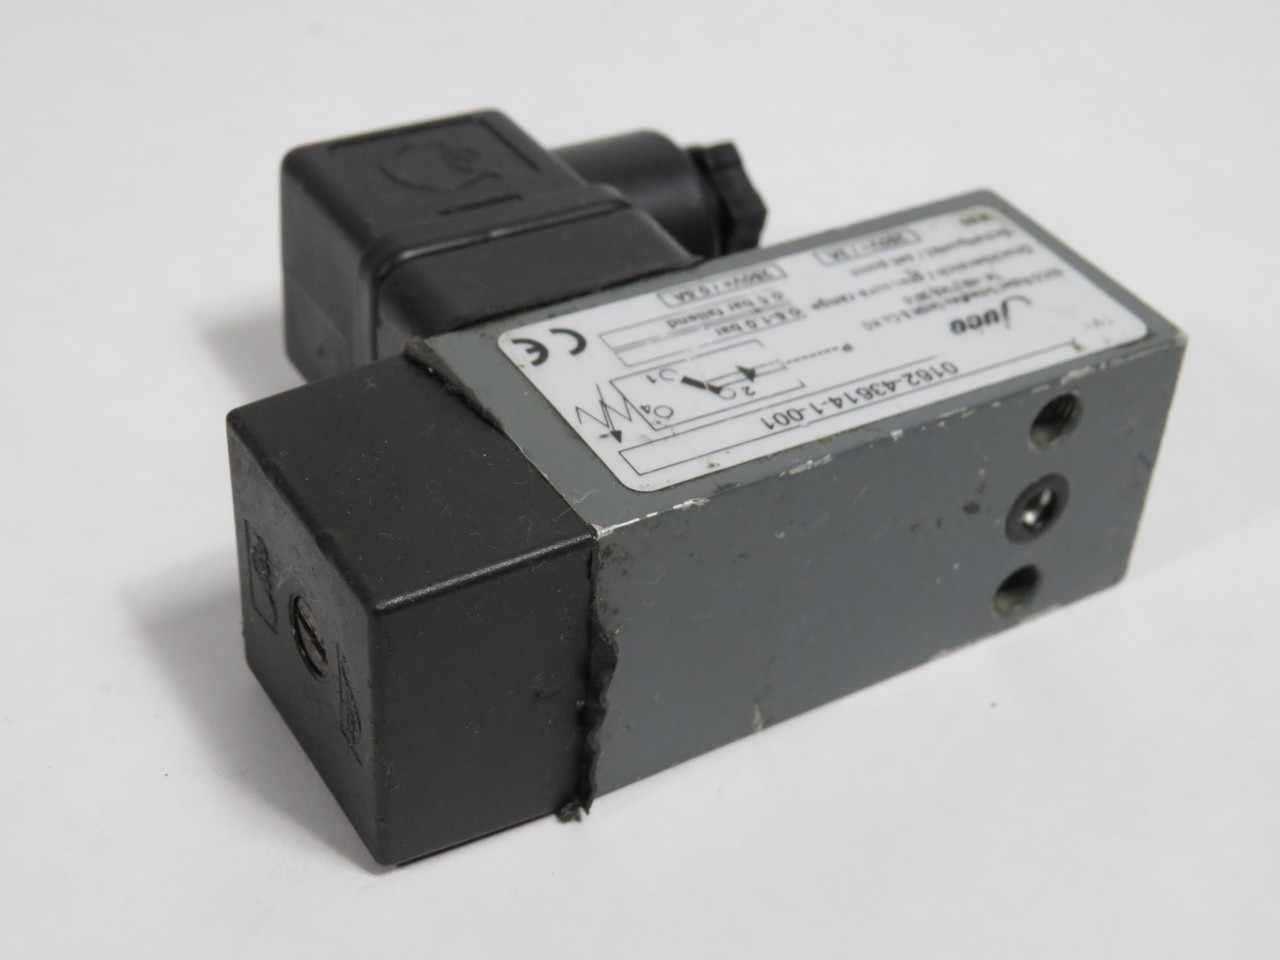 Suco 0162-43614-1-001 Diaphragm Pressure Switch 250VAC@3A 250VDC@0.5A USED